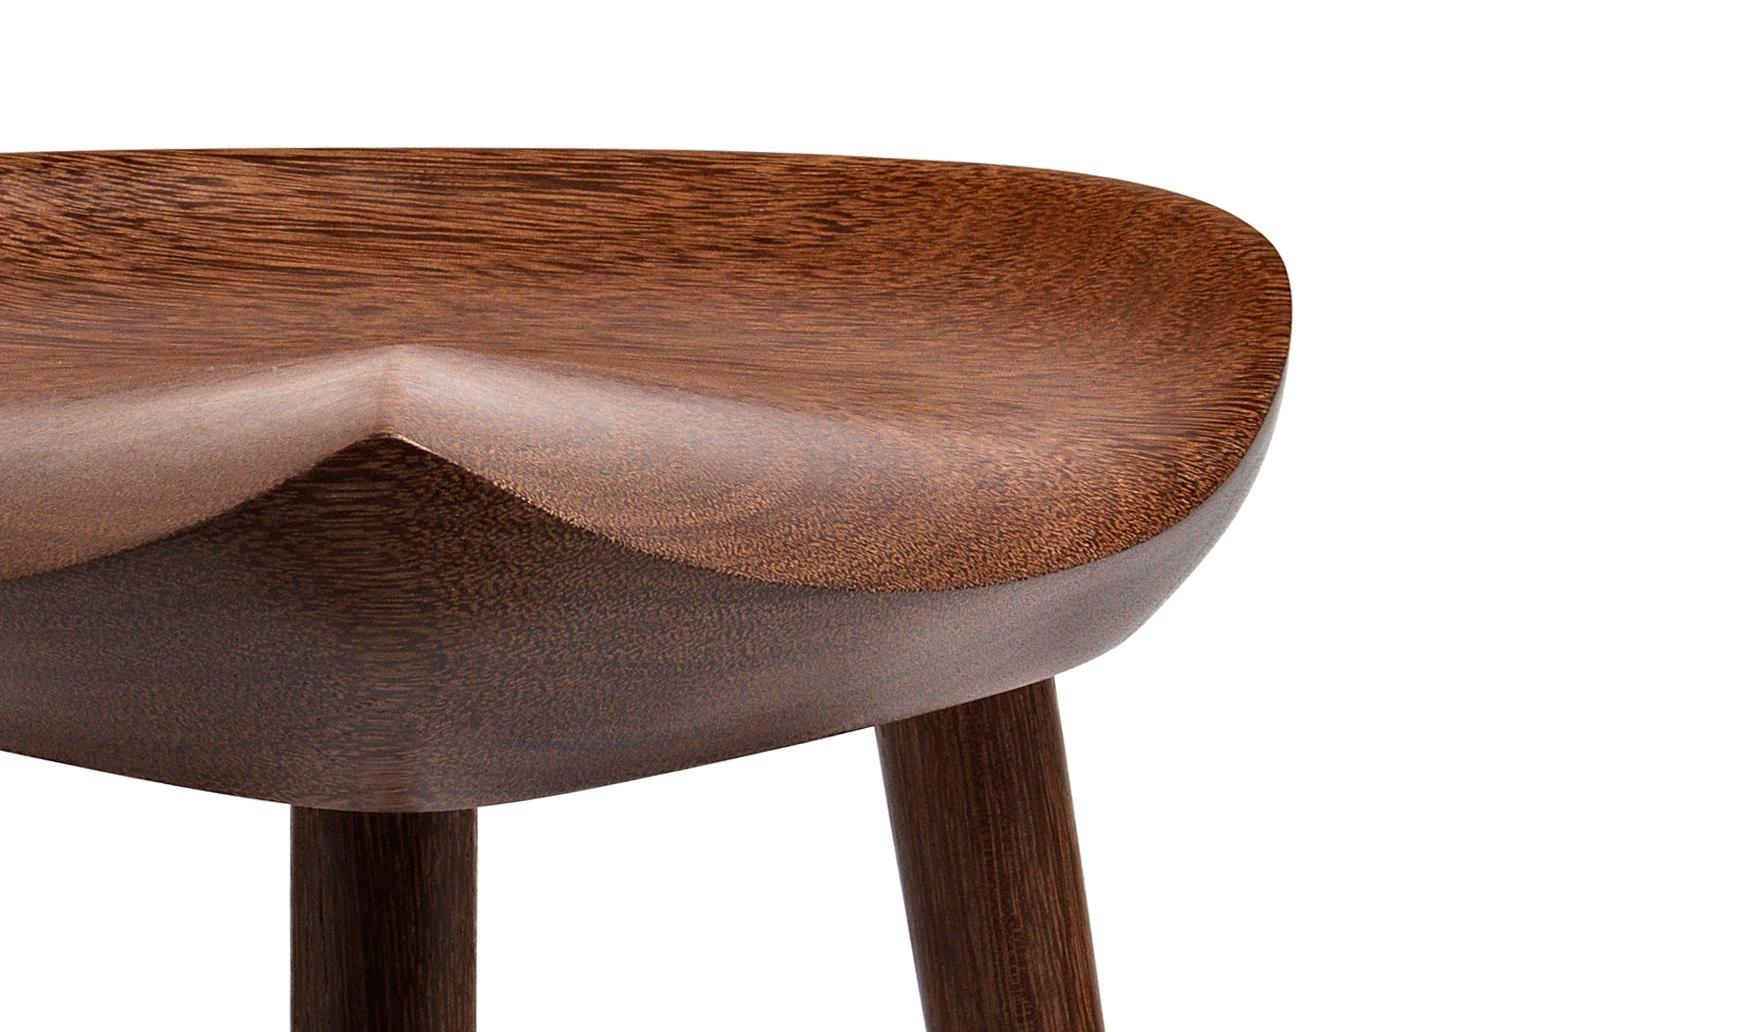 Contemporary stool in Brazilian Hardwood hand carved by woodworking artist Ricardo Graham Ferreira. These uniques pieces of furniture is made in some exquisite tropical wood species.

This unique saddle stool has a perfect ergonomic design which